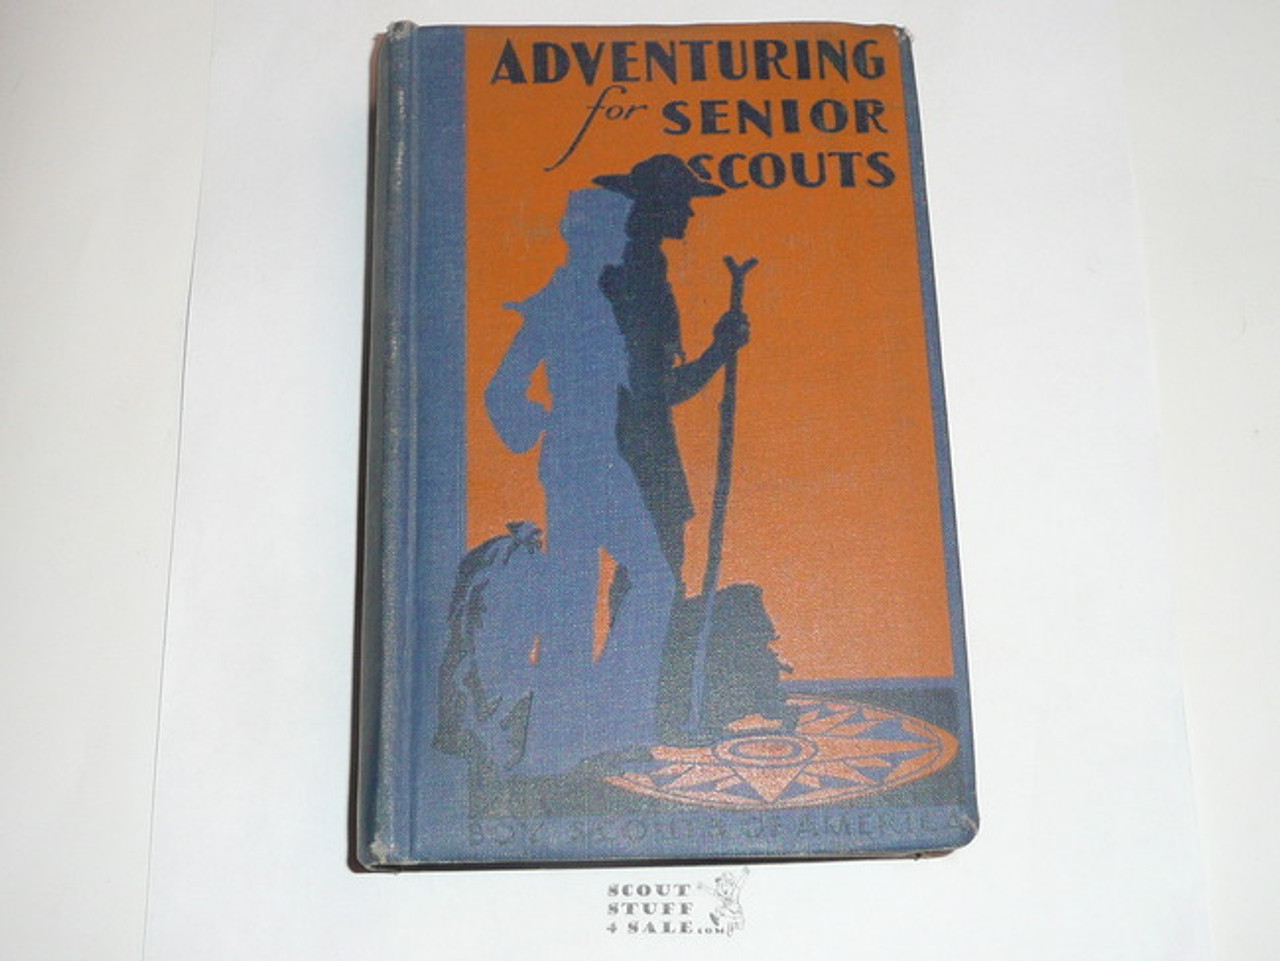 1938 Adventuring for Senior Scouts, First Edition, First Printing, shows some use